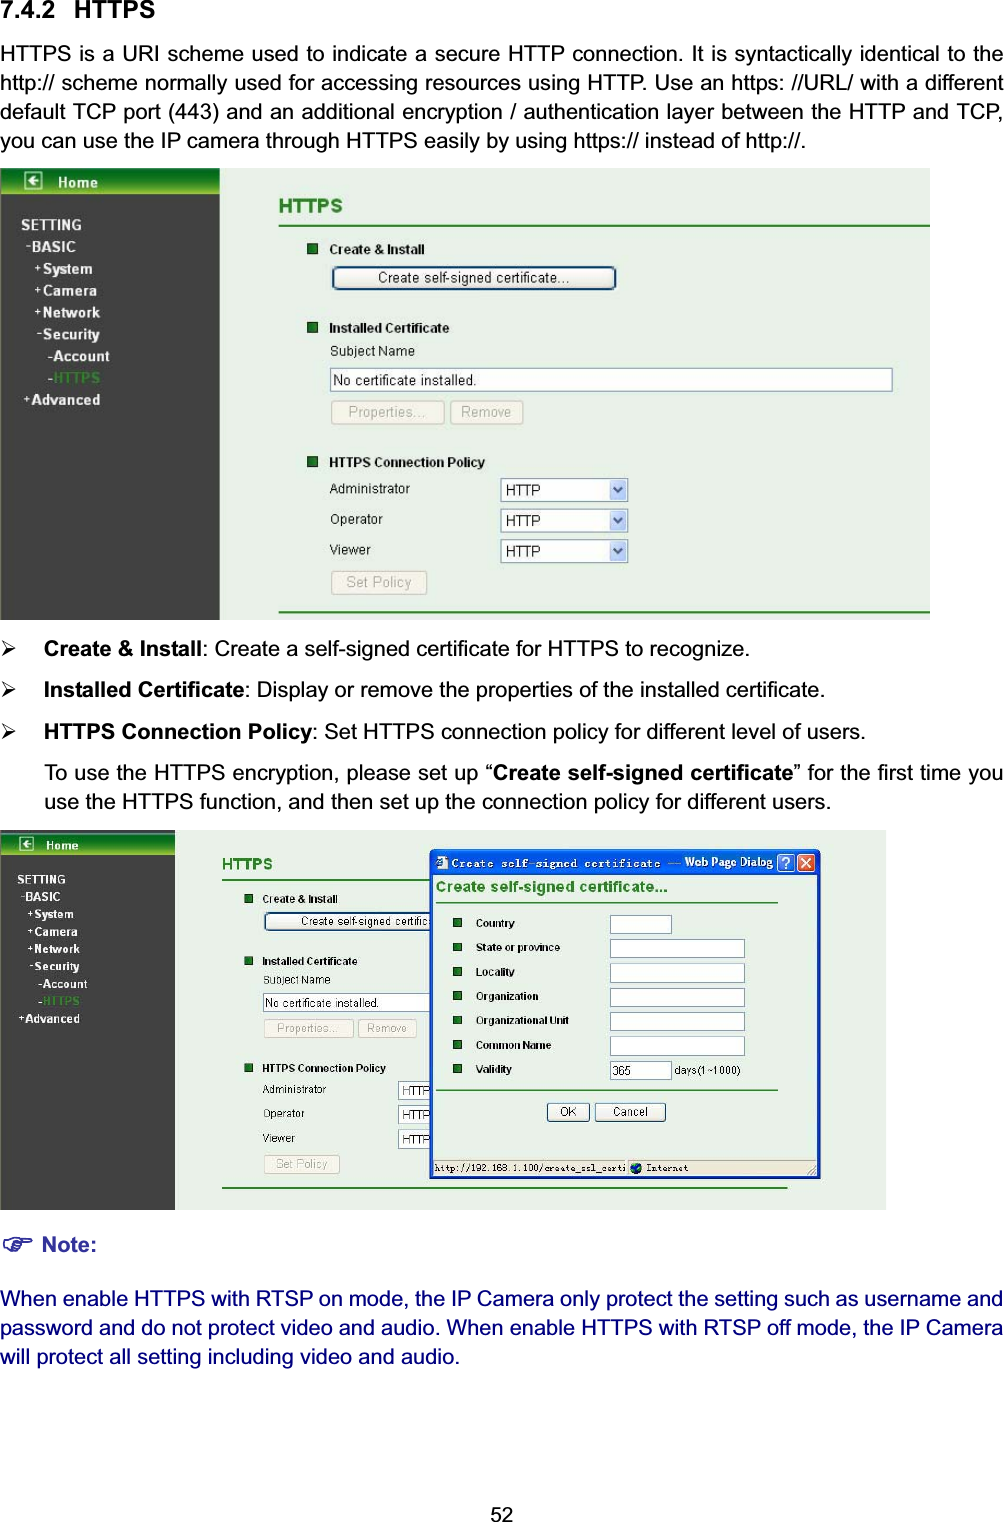  52 7.4.2 HTTPS HTTPS is a URI scheme used to indicate a secure HTTP connection. It is syntactically identical to the http:// scheme normally used for accessing resources using HTTP. Use an https: //URL/ with a different default TCP port (443) and an additional encryption / authentication layer between the HTTP and TCP, you can use the IP camera through HTTPS easily by using https:// instead of http://.  ¾ Create &amp; Install: Create a self-signed certificate for HTTPS to recognize. ¾ Installed Certificate: Display or remove the properties of the installed certificate. ¾ HTTPS Connection Policy: Set HTTPS connection policy for different level of users. To use the HTTPS encryption, please set up “Create self-signed certificate” for the first time you use the HTTPS function, and then set up the connection policy for different users.  ) Note: When enable HTTPS with RTSP on mode, the IP Camera only protect the setting such as username and password and do not protect video and audio. When enable HTTPS with RTSP off mode, the IP Camera will protect all setting including video and audio. 